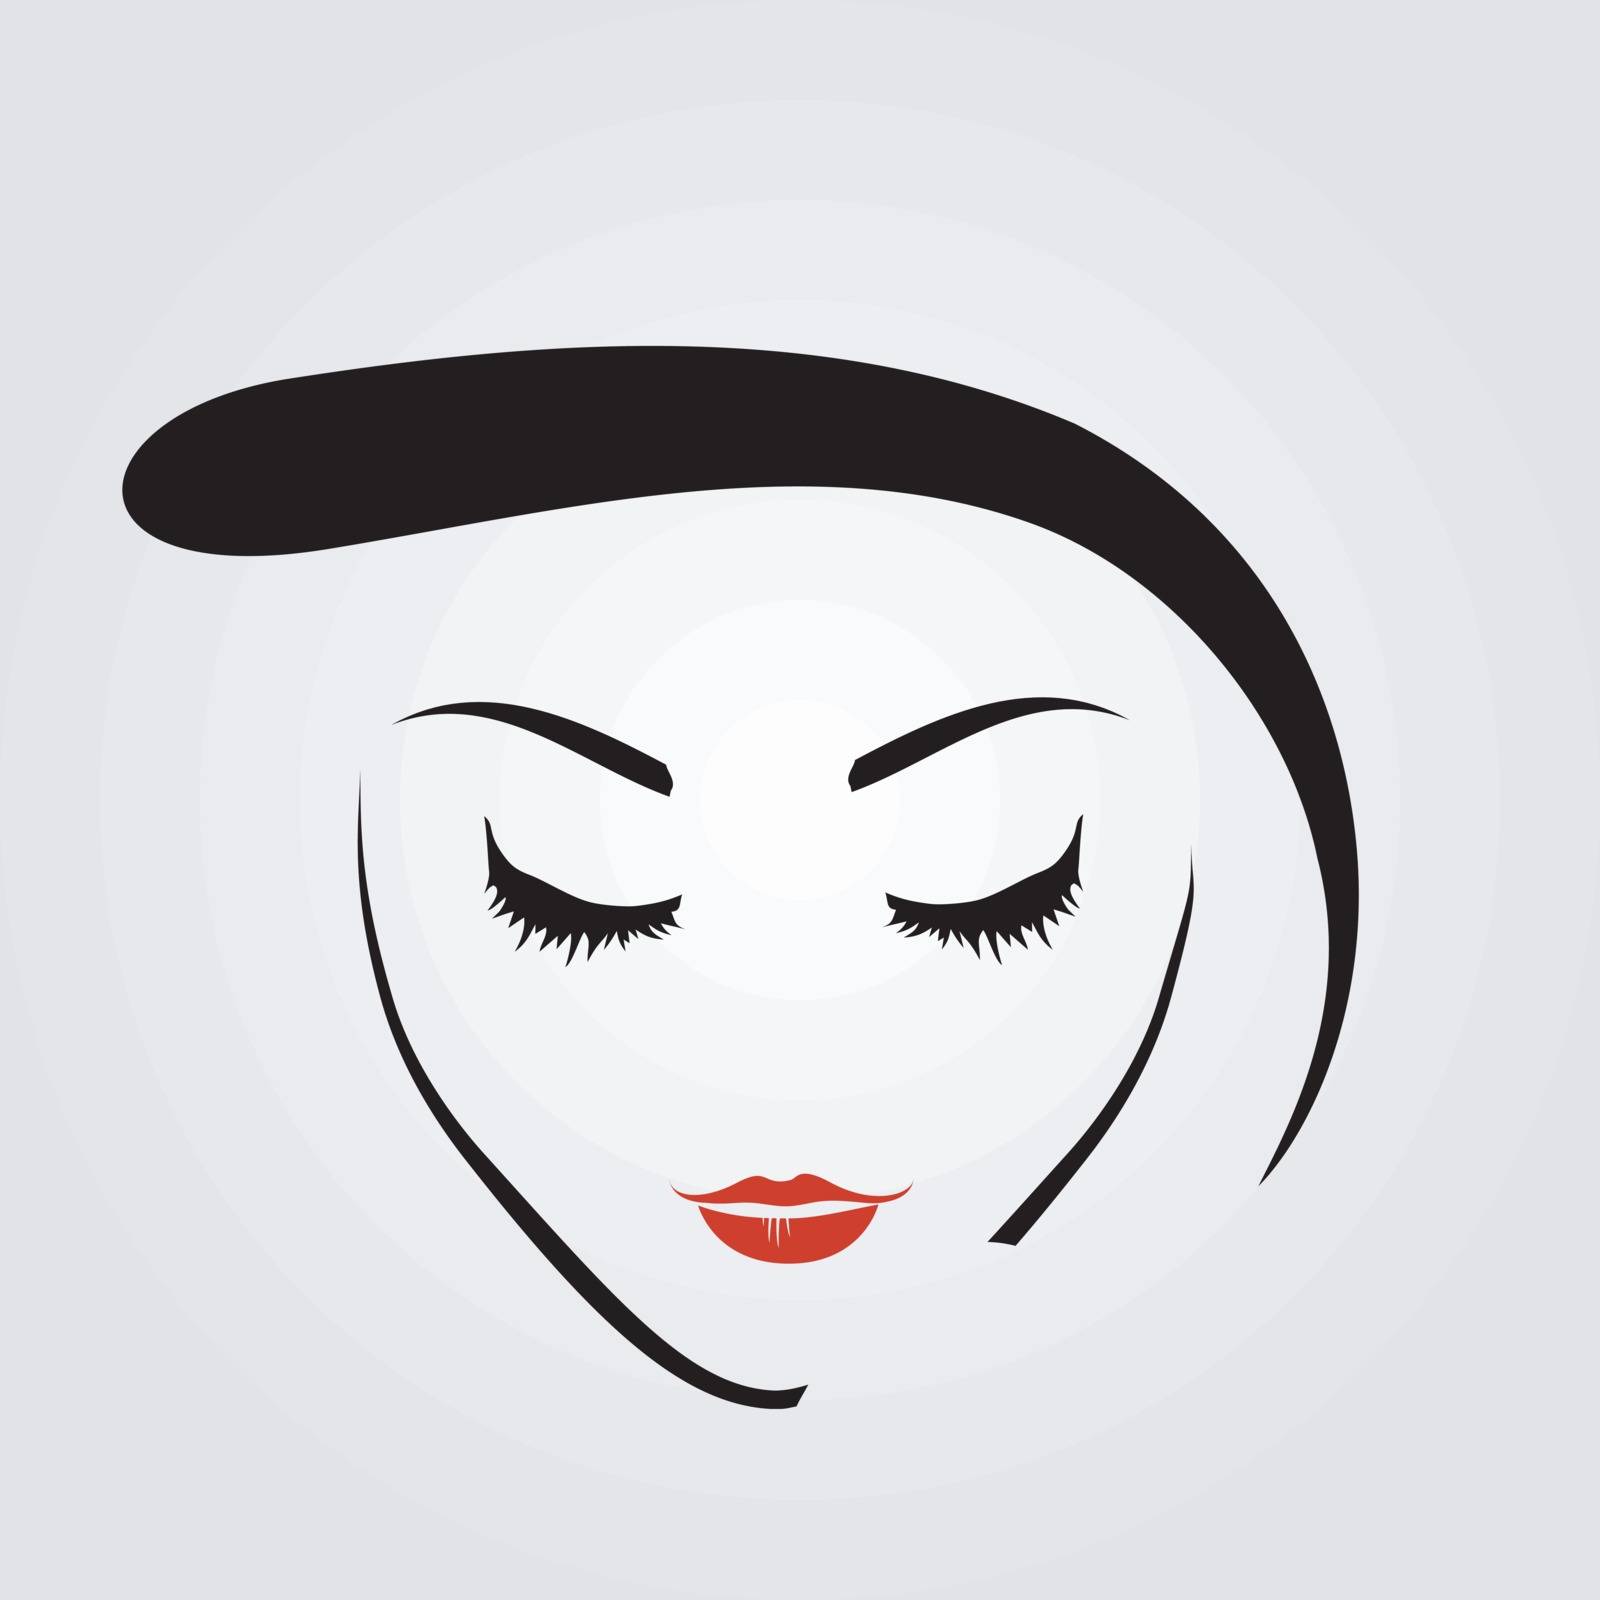 Graphic of a woman with vintage hairstyle and make up by shawlinmohd